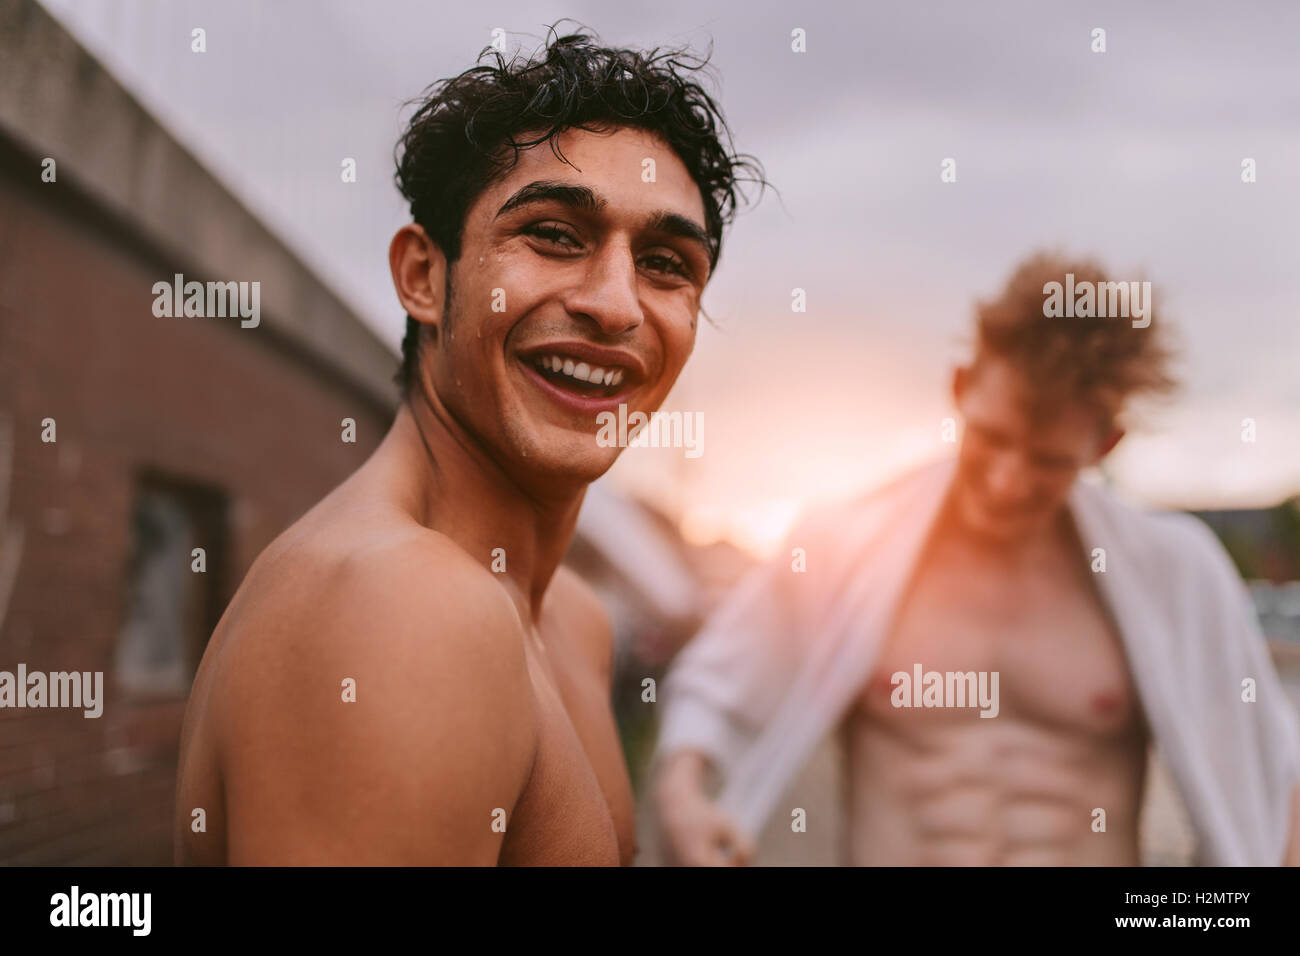 Portrait of handsome young man shirtless looking at camera and smiling with friends in background. Stock Photo